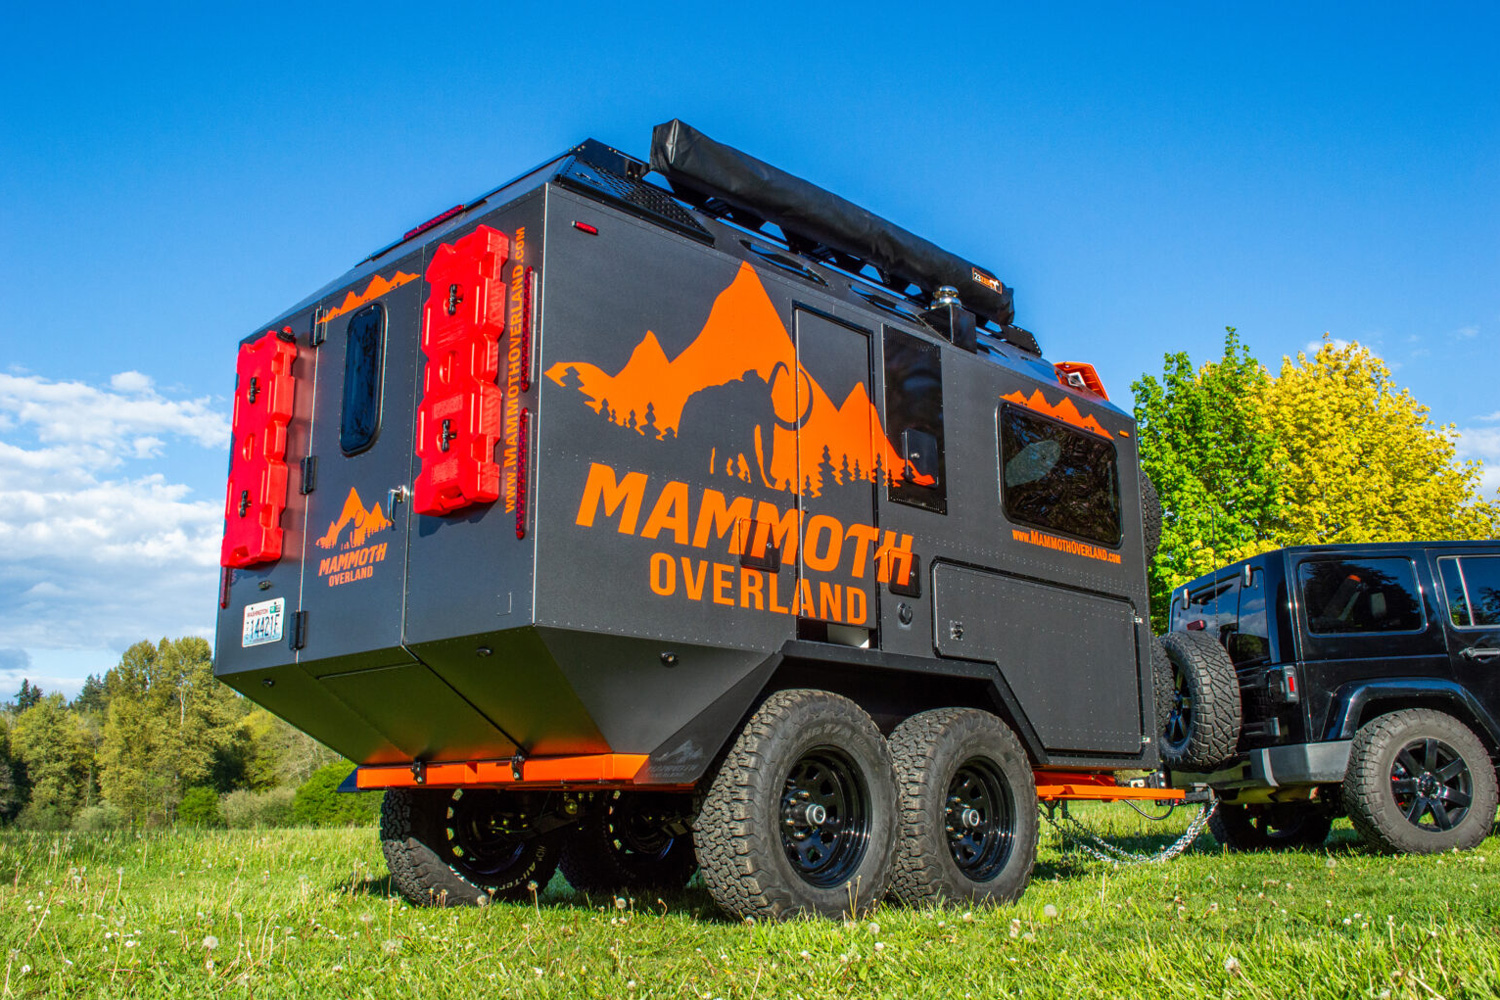 Mammoth Overland TL Travel Trailer being towed by a black Jeep Wrangler.